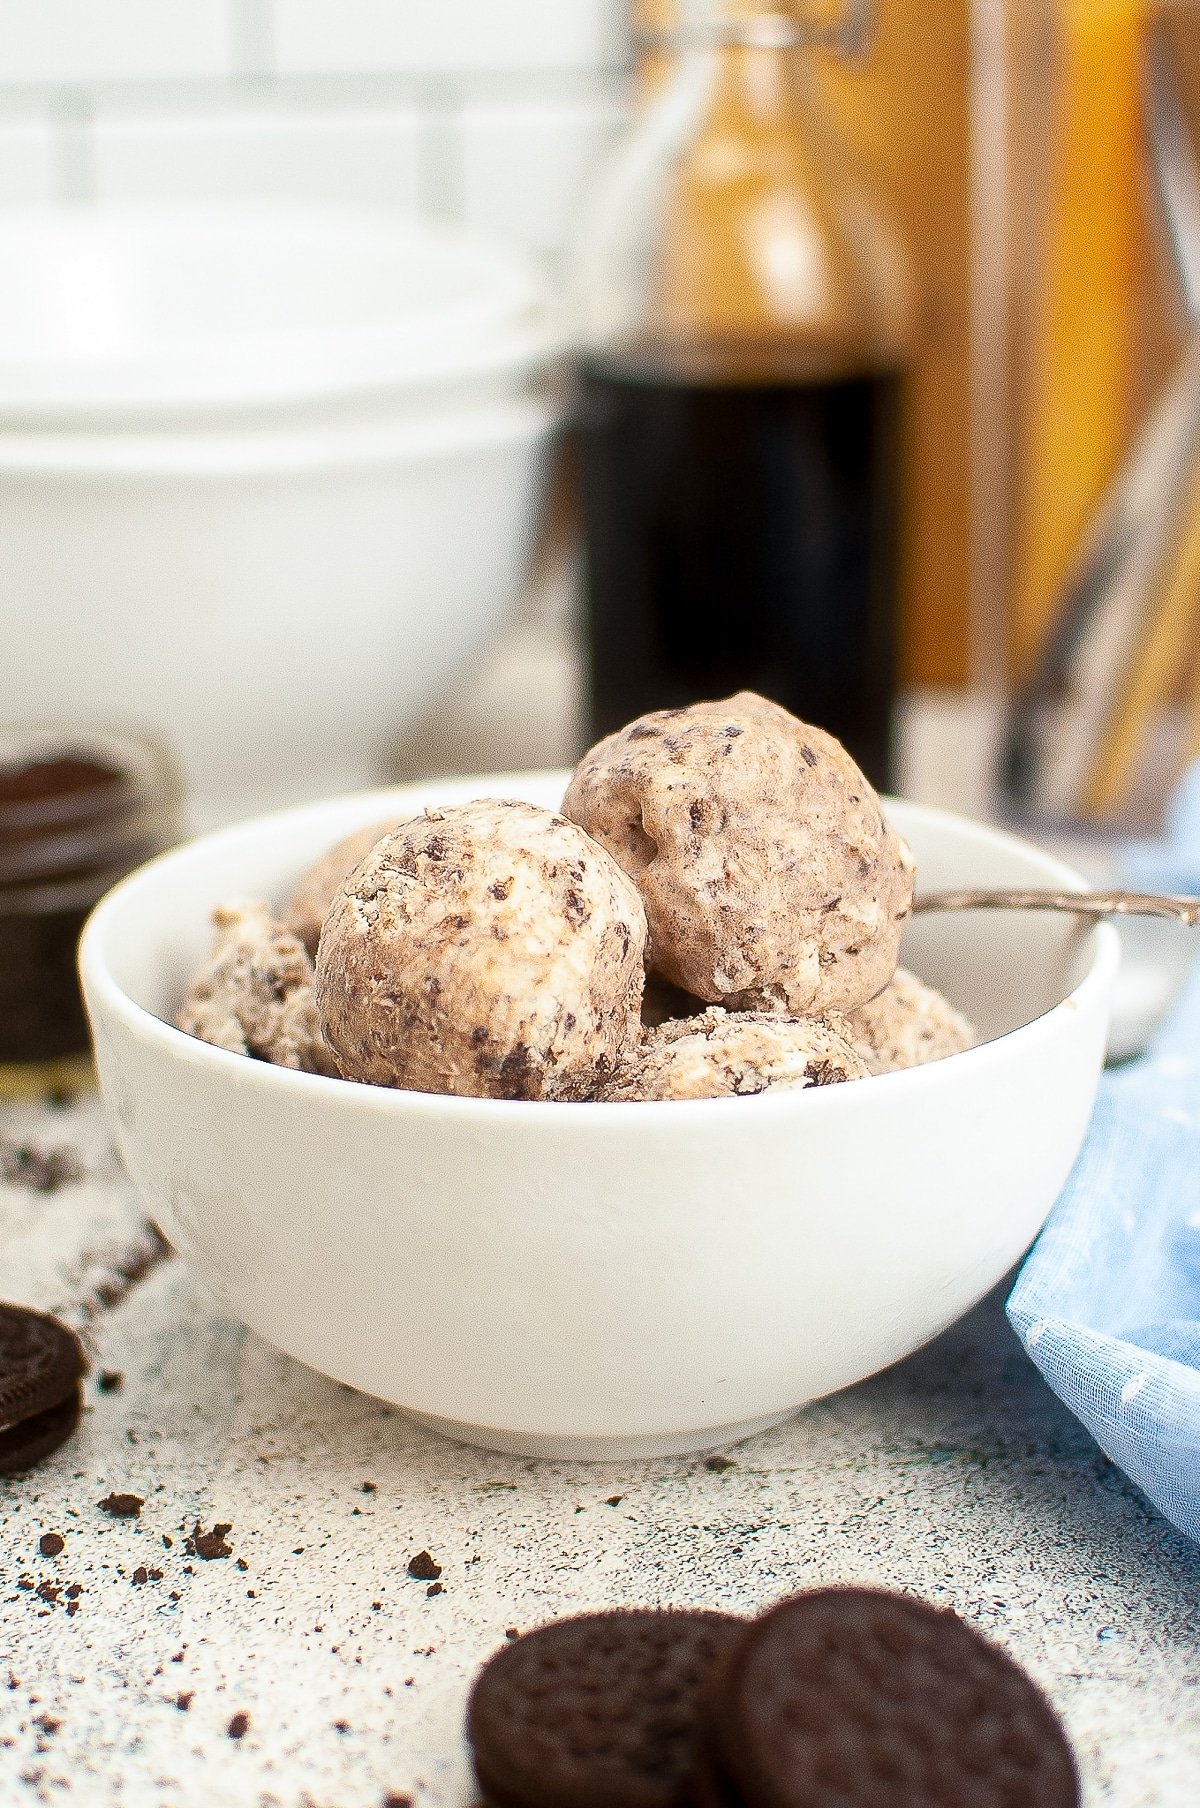 scoops of Cookies and Cream Ice Cream served in a white bowl